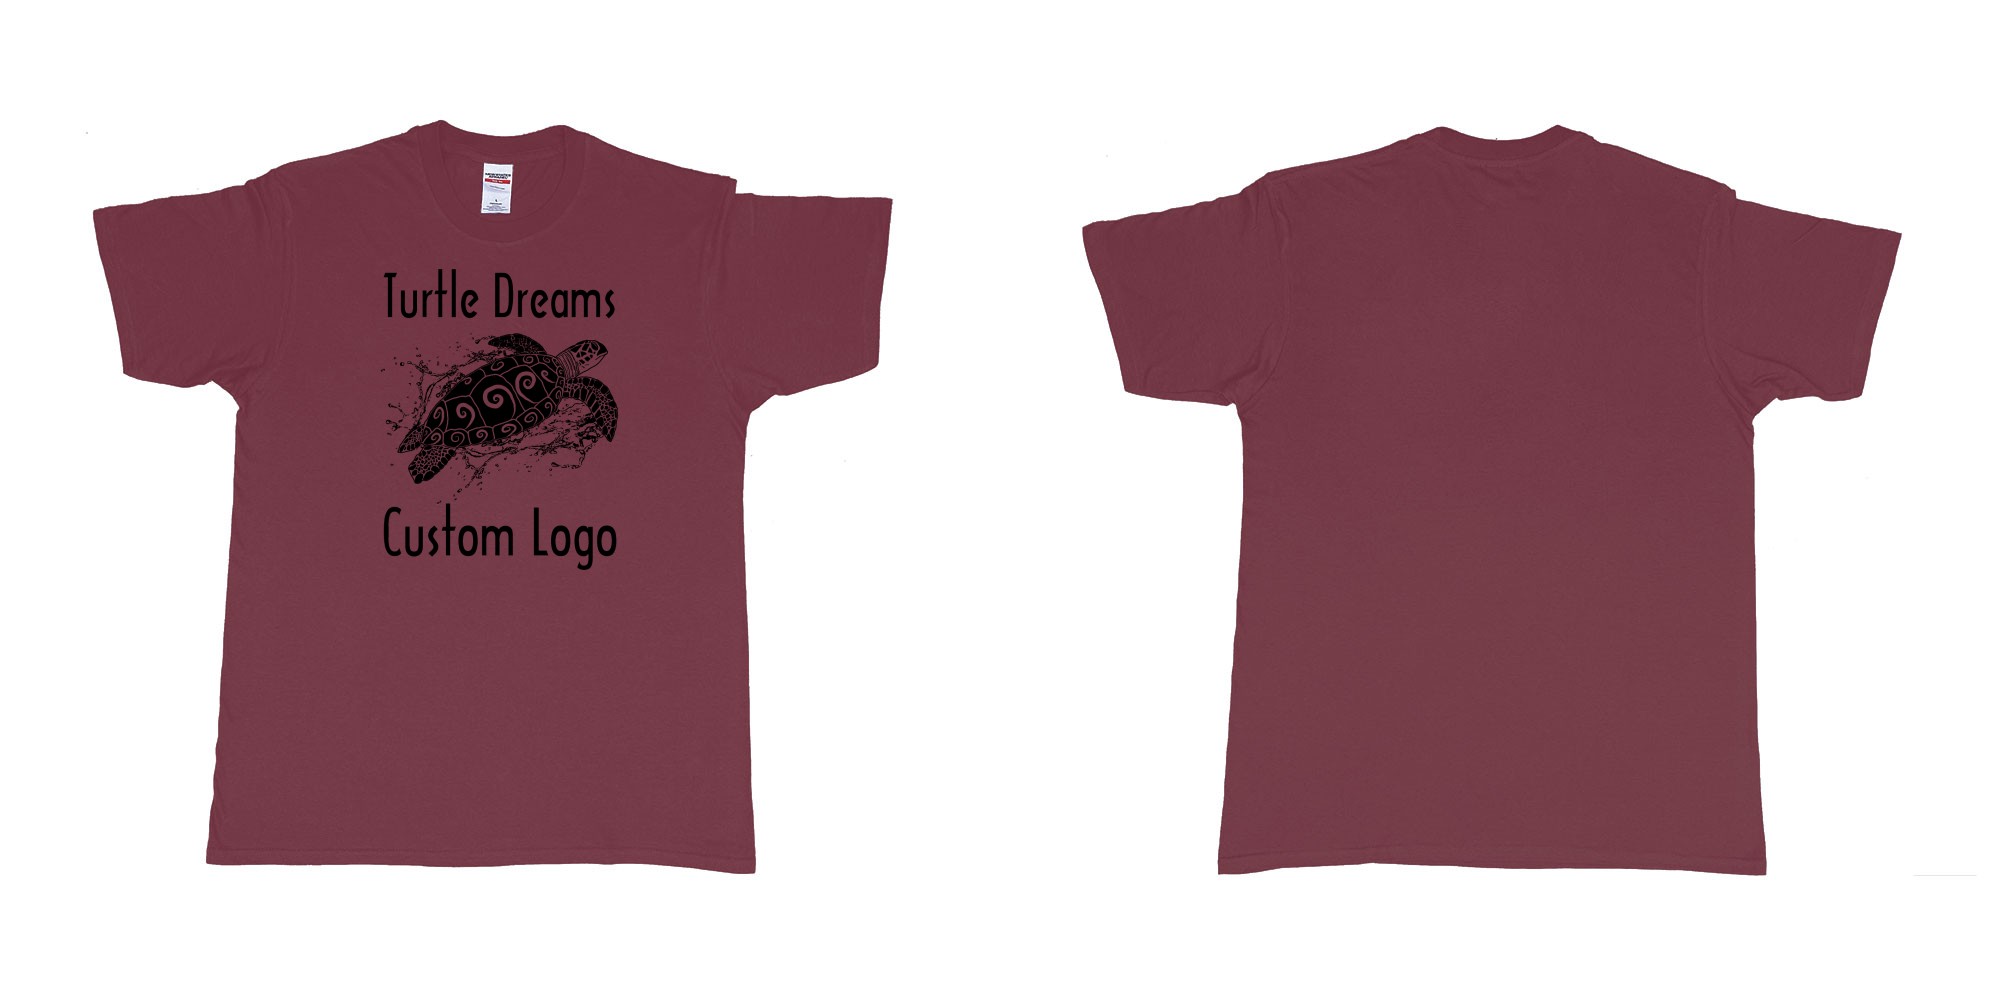 Custom tshirt design turtle dreams custom logo design in fabric color marron choice your own text made in Bali by The Pirate Way